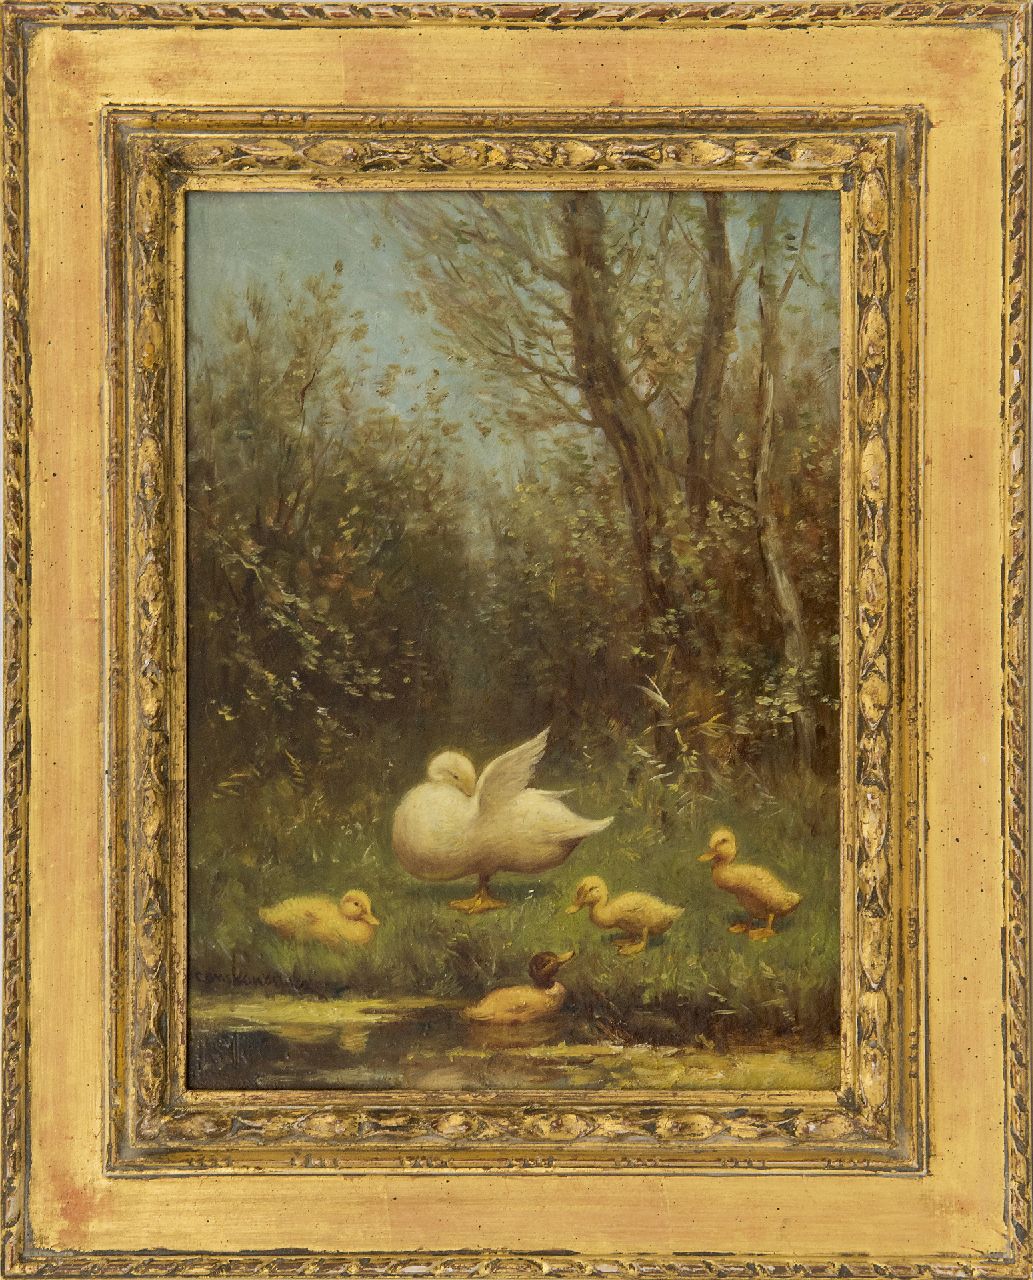 Artz C.D.L.  | 'Constant' David Ludovic Artz, Motherduck and her ducklings on a river bank, oil on panel 24.1 x 18.1 cm, signed l.l.